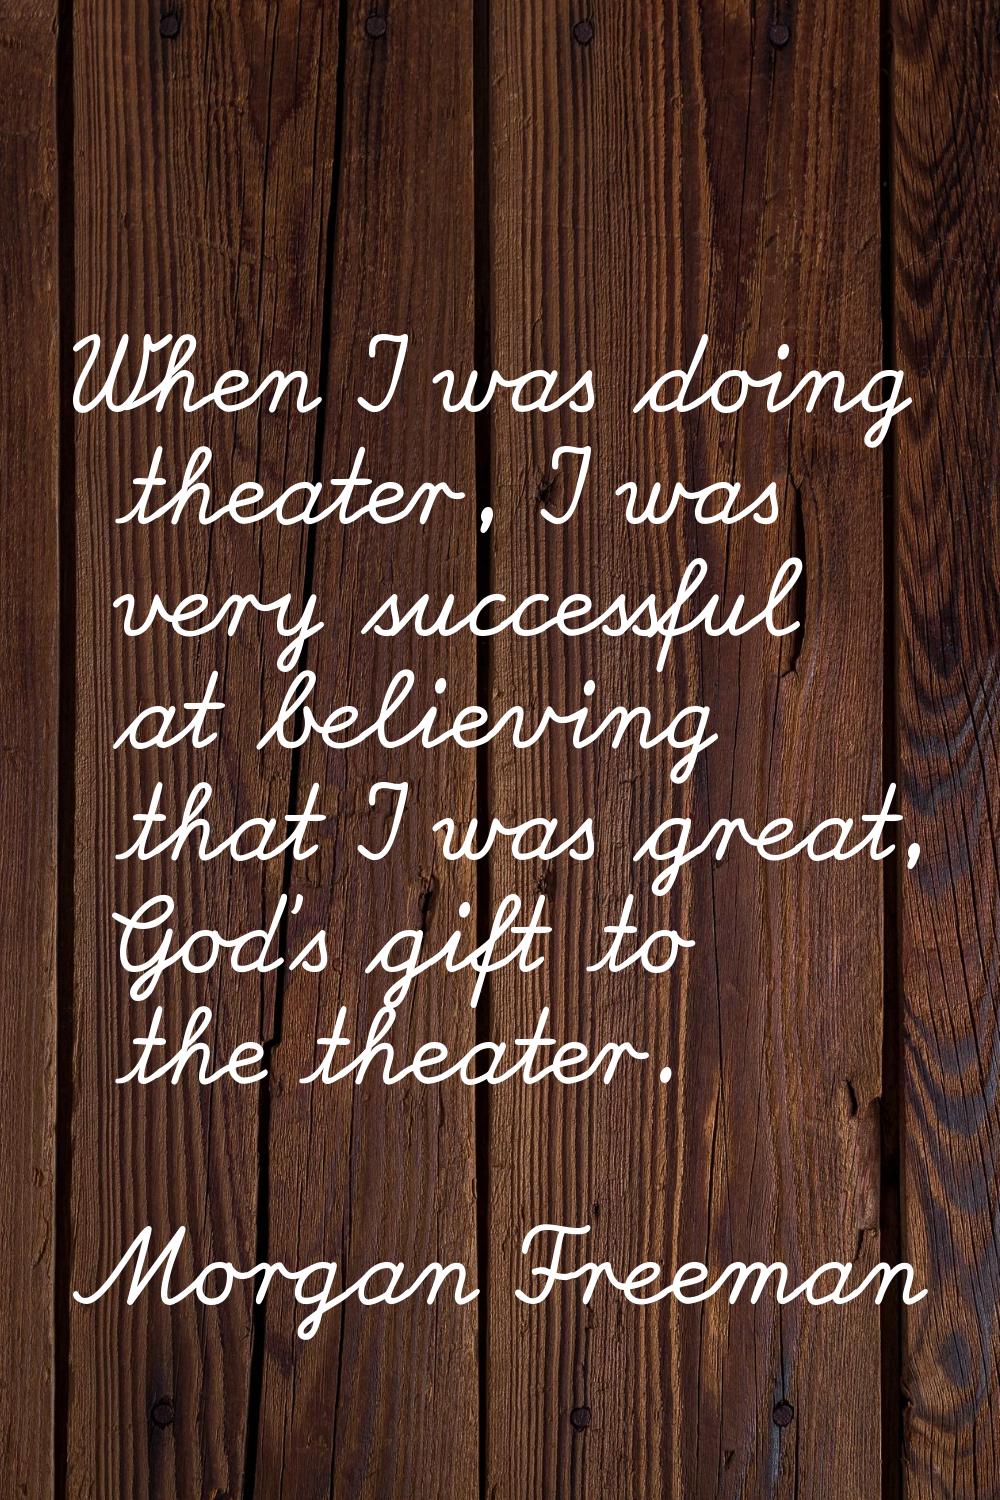 When I was doing theater, I was very successful at believing that I was great, God's gift to the th